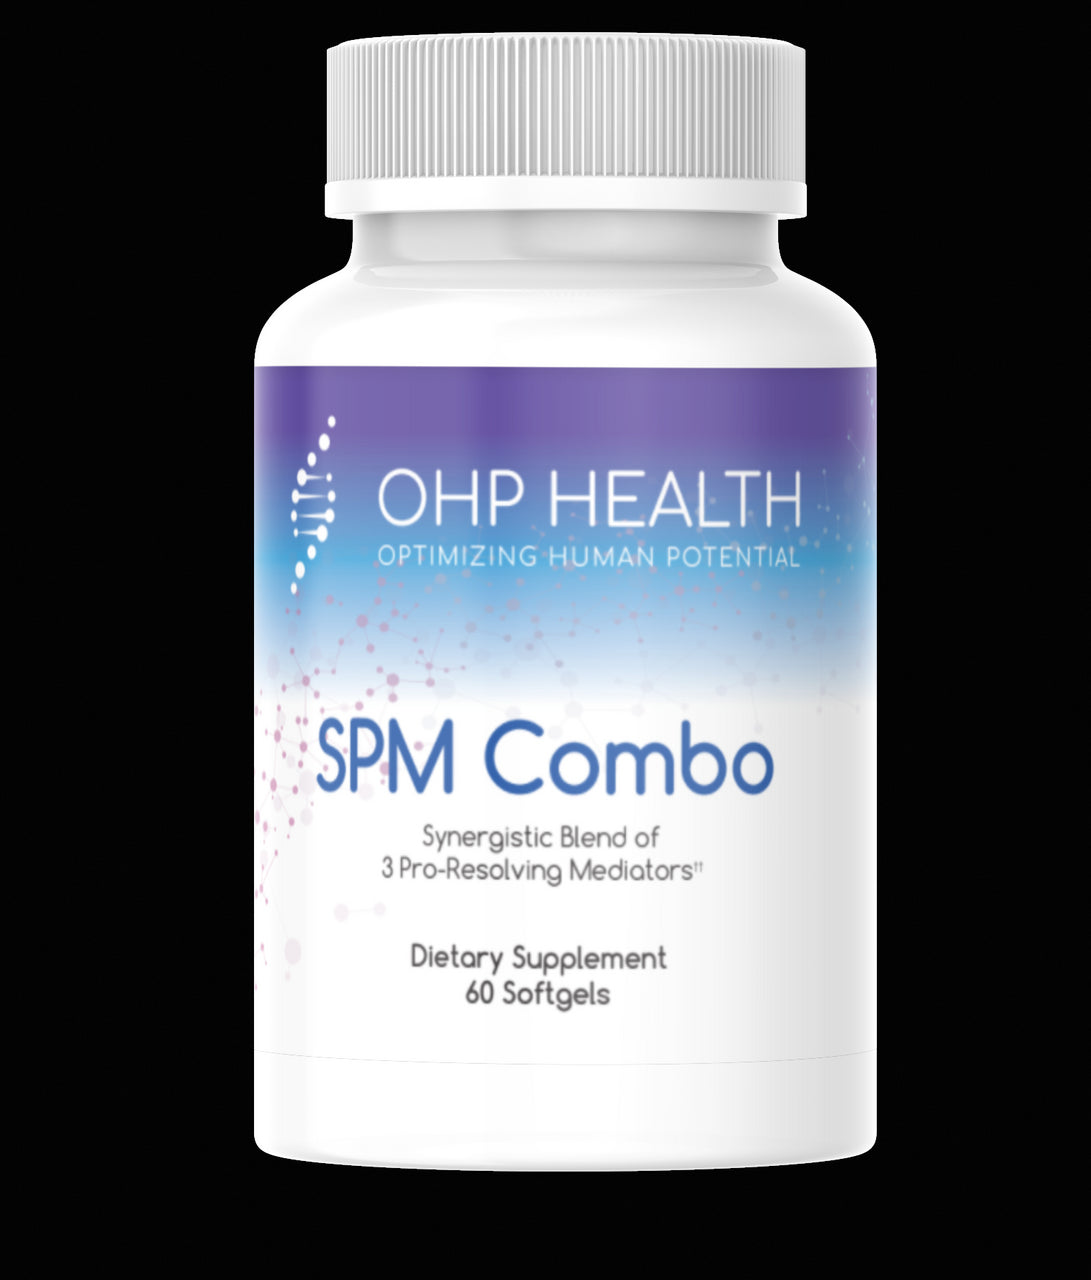 SPM Combo is a combination of three highly potent “specialized pro-resolving mediators” designed to help support the body’s natural ability to respond to physical challenges and “resolve” the initial steps in the natural inflammatory process.* The “resolution” of a healthy inflammatory response is an active process controlled by these unique metabolites.